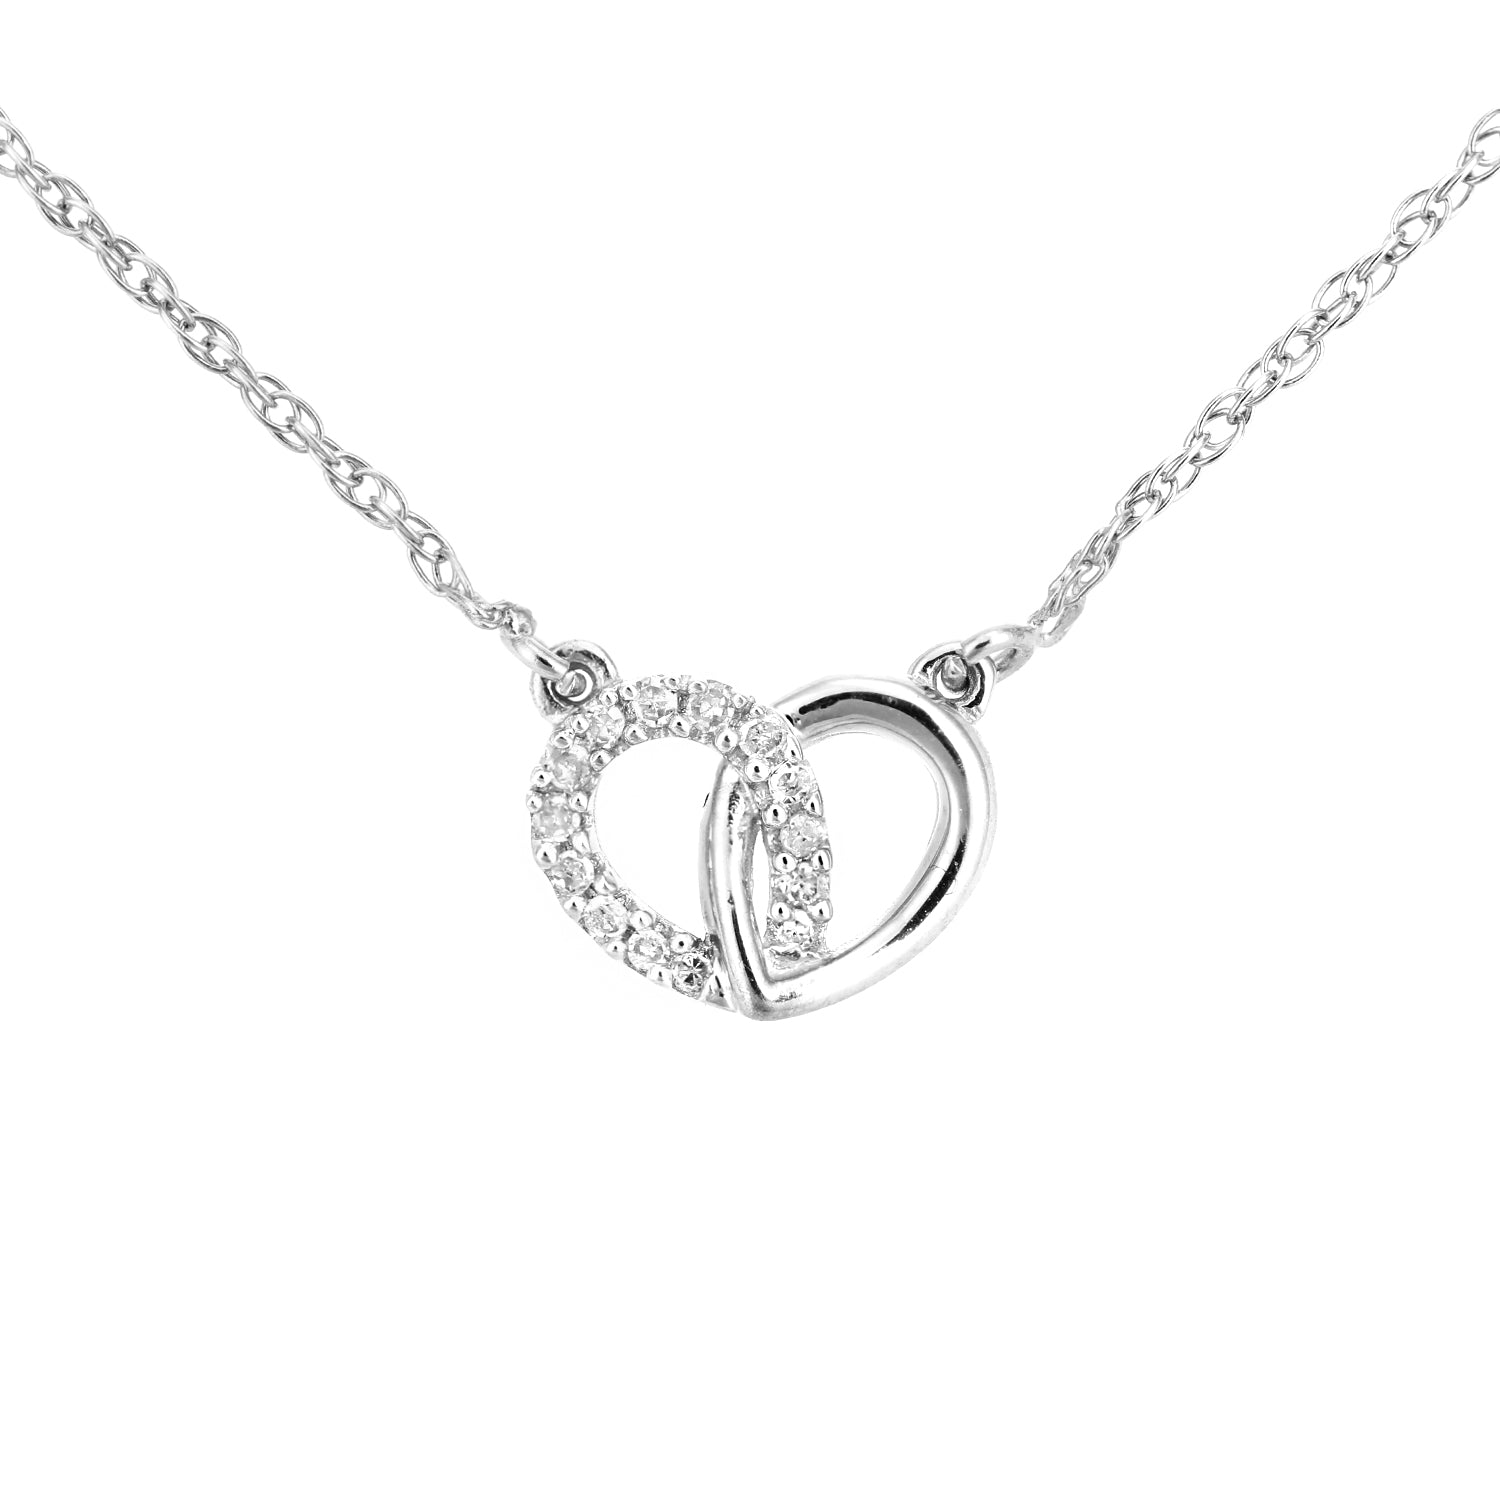 9ct White Gold  5pts Diamond Heart Infinity Charm Necklace 18 inch - PP0AXL5968W